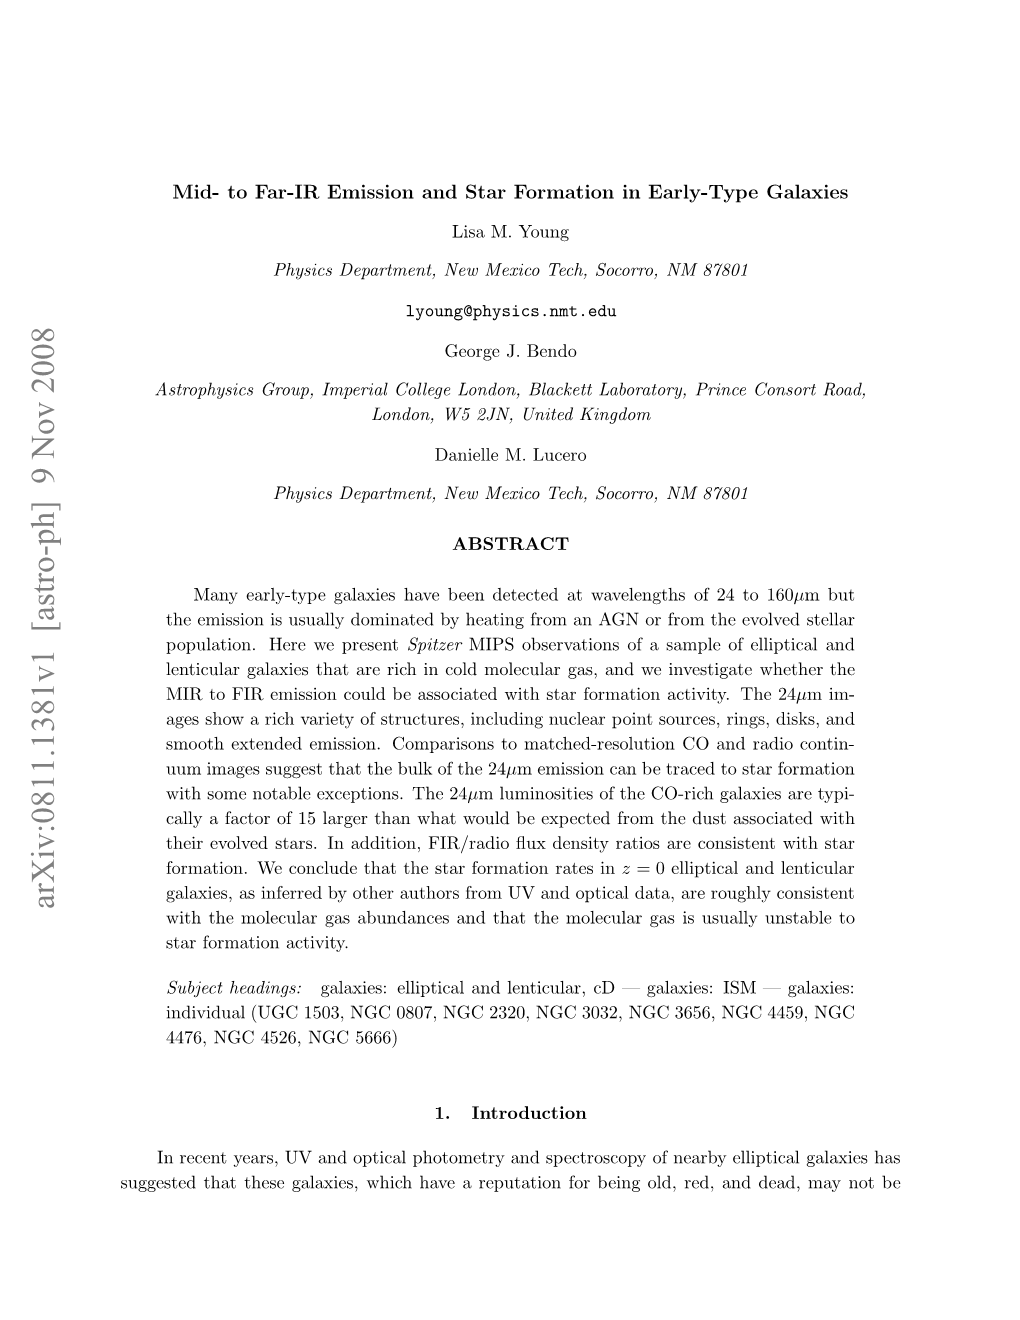 Mid-To Far-IR Emission and Star Formation in Early-Type Galaxies